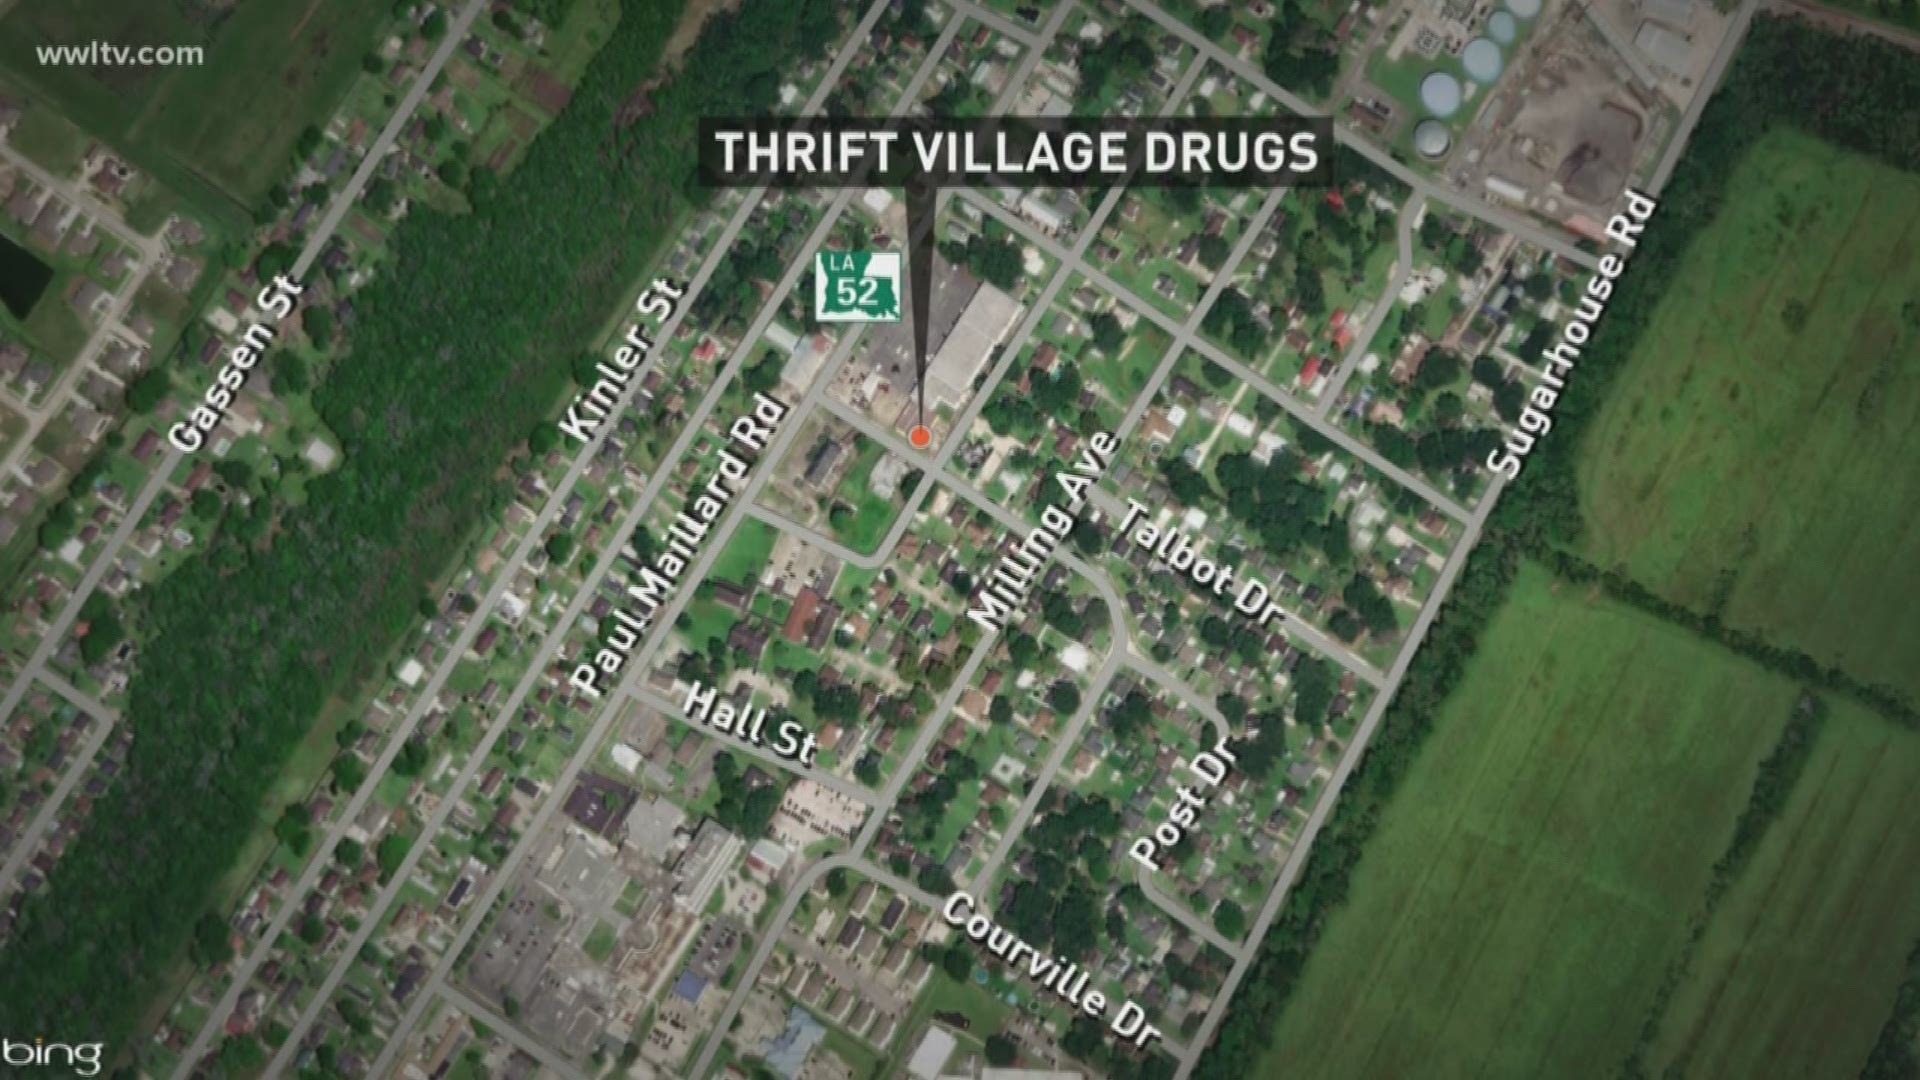 According to the St. Charles Parish Sheriff's Office, the incident happened around 6 p.m. at Thrift Village Drugs store on Paul Maillard Road.